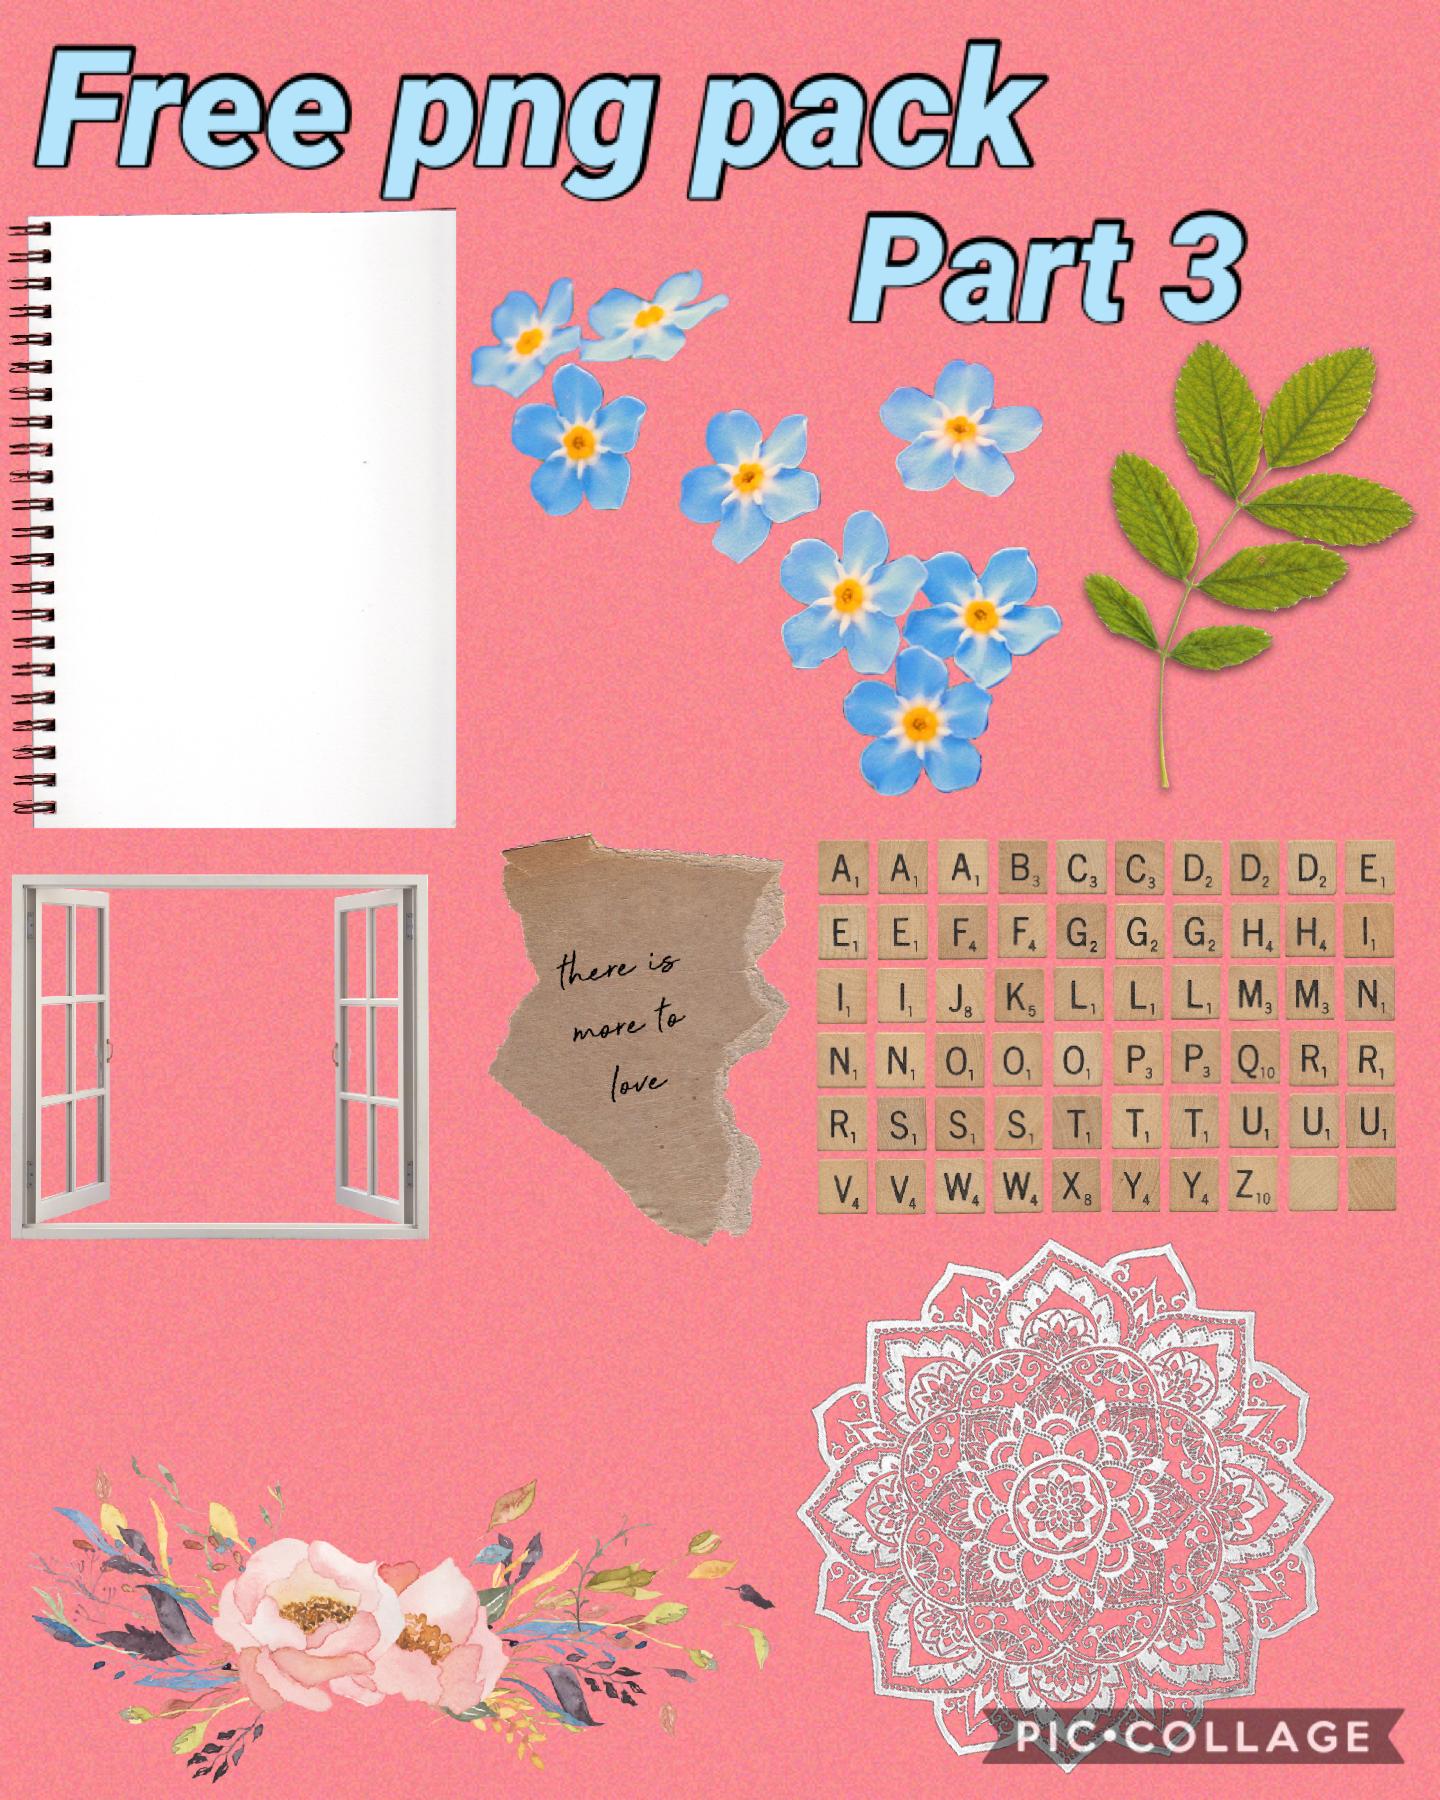 Free png pack part 3